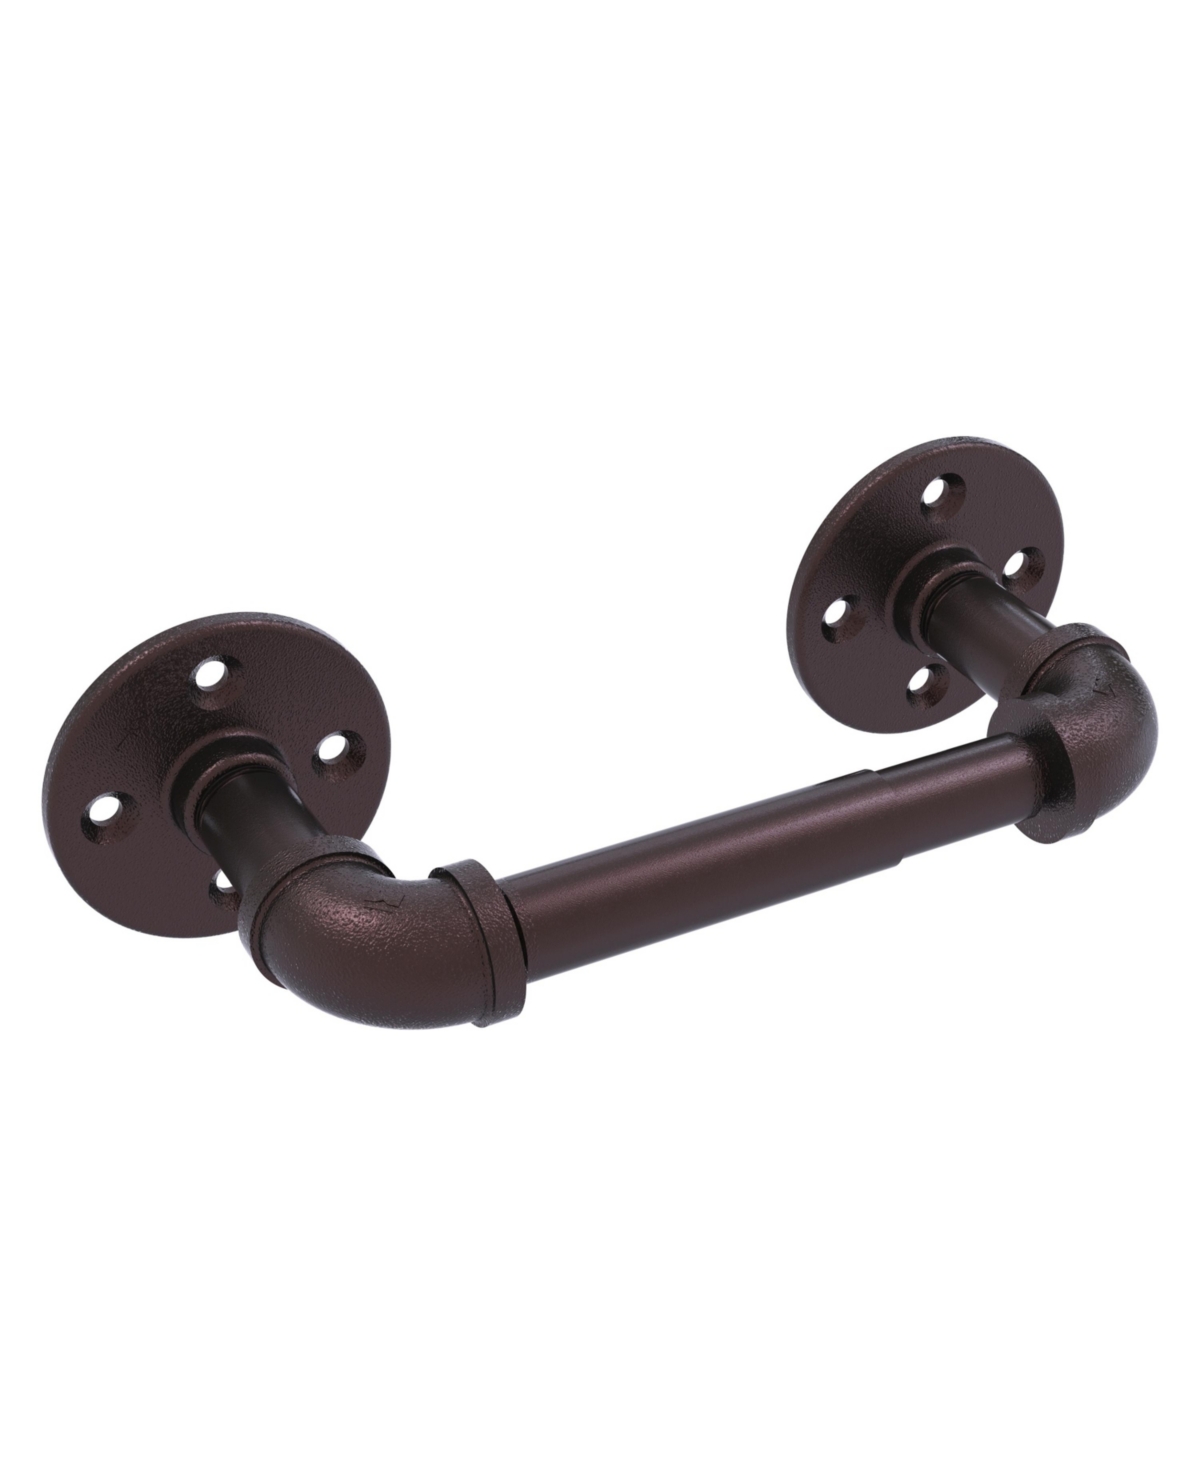 15902458 Pipeline Collection 2 Post Toilet Paper Holder sku 15902458